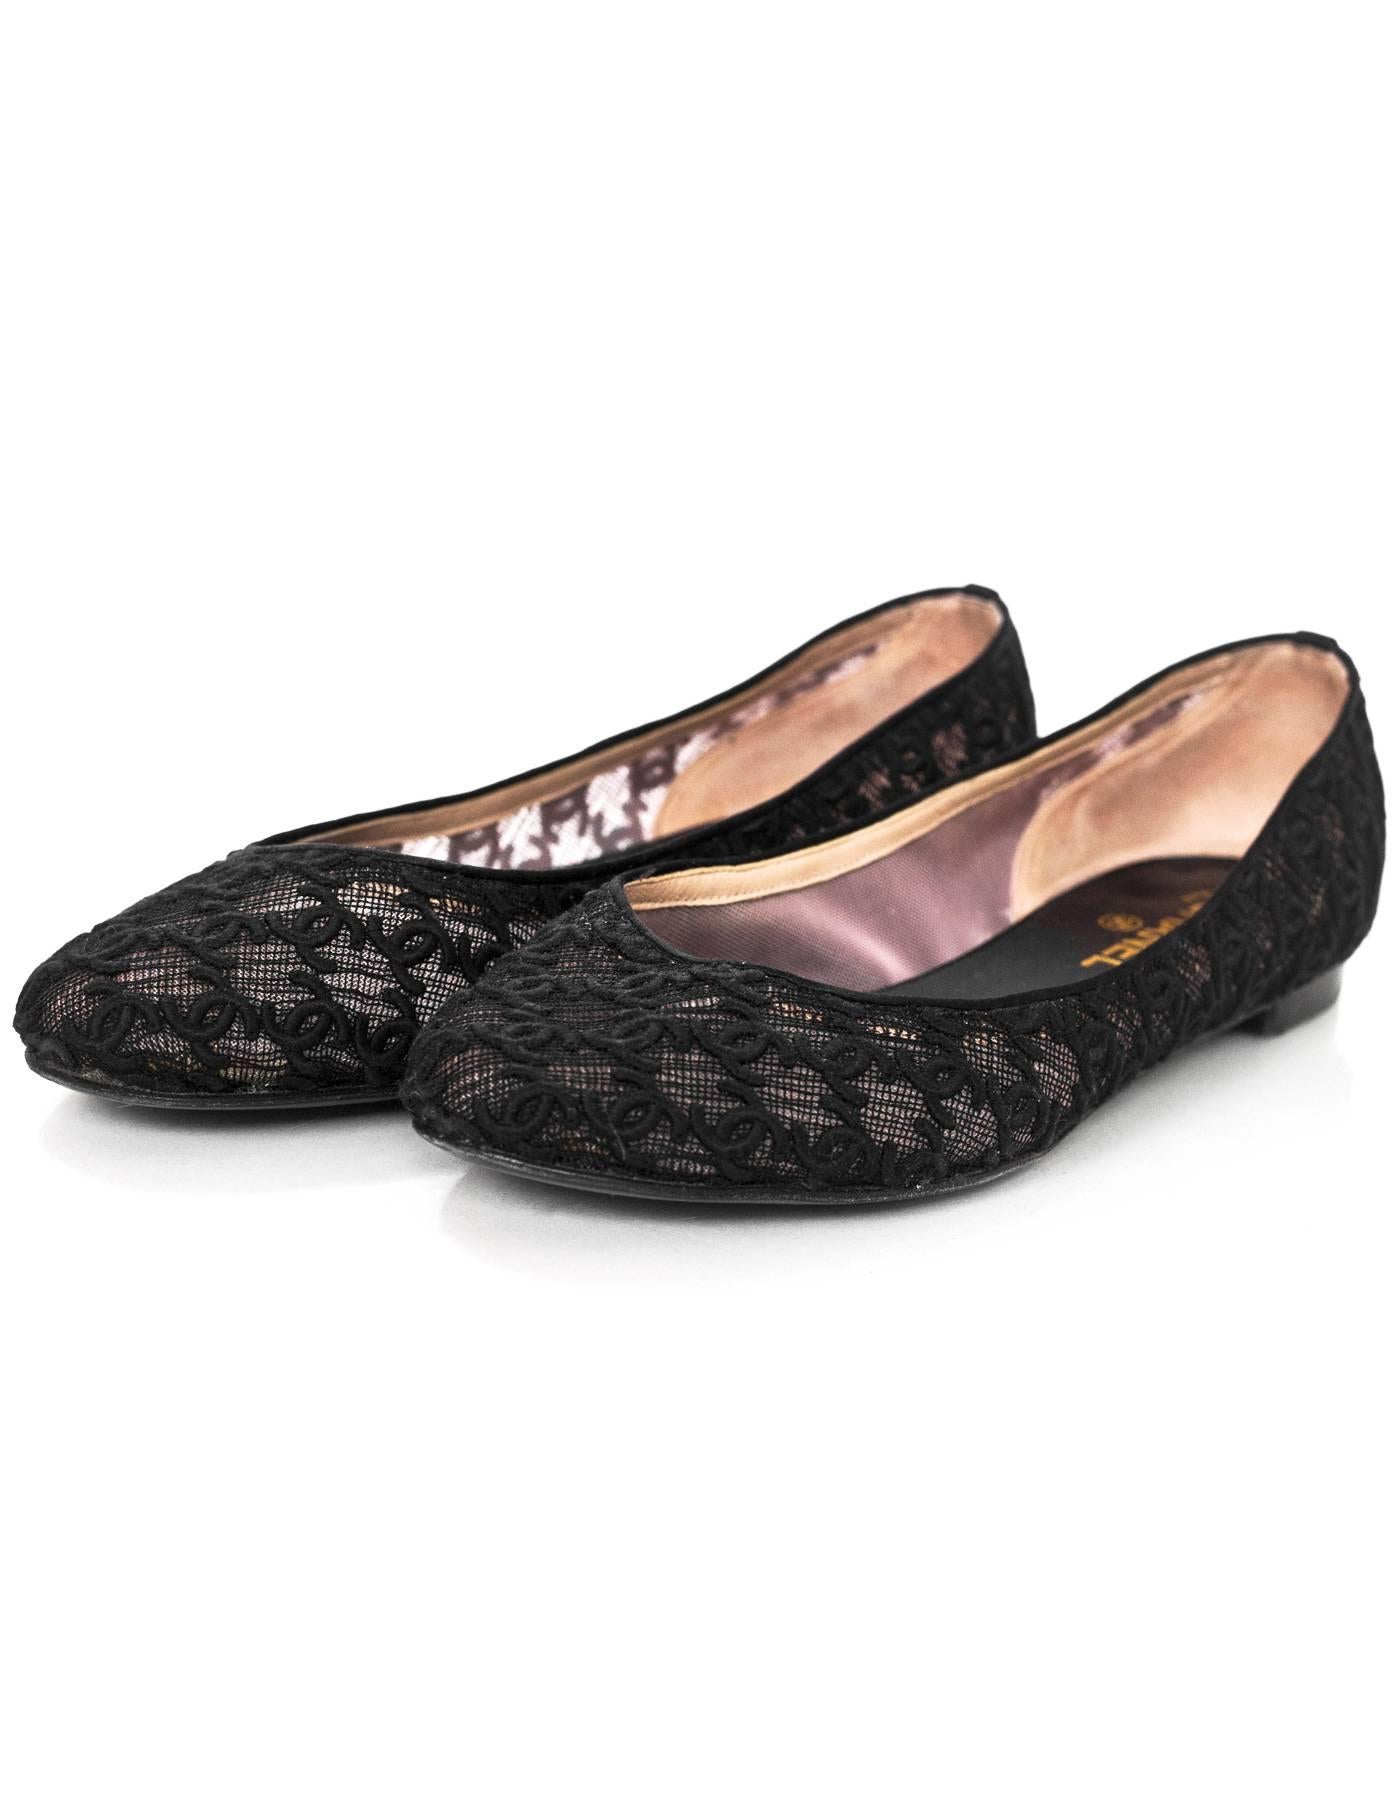 Chanel Black CC Mesh Ballet Flats Sz 42

Made In: Italy
Color: Black
Materials: Mesh
Closure/Opening: Slide on
Sole Stamp: CC Made in Italy 42
Retail Price: $825 + tax
Overall Condition: Excellent pre-owned condition with the exception of light wear